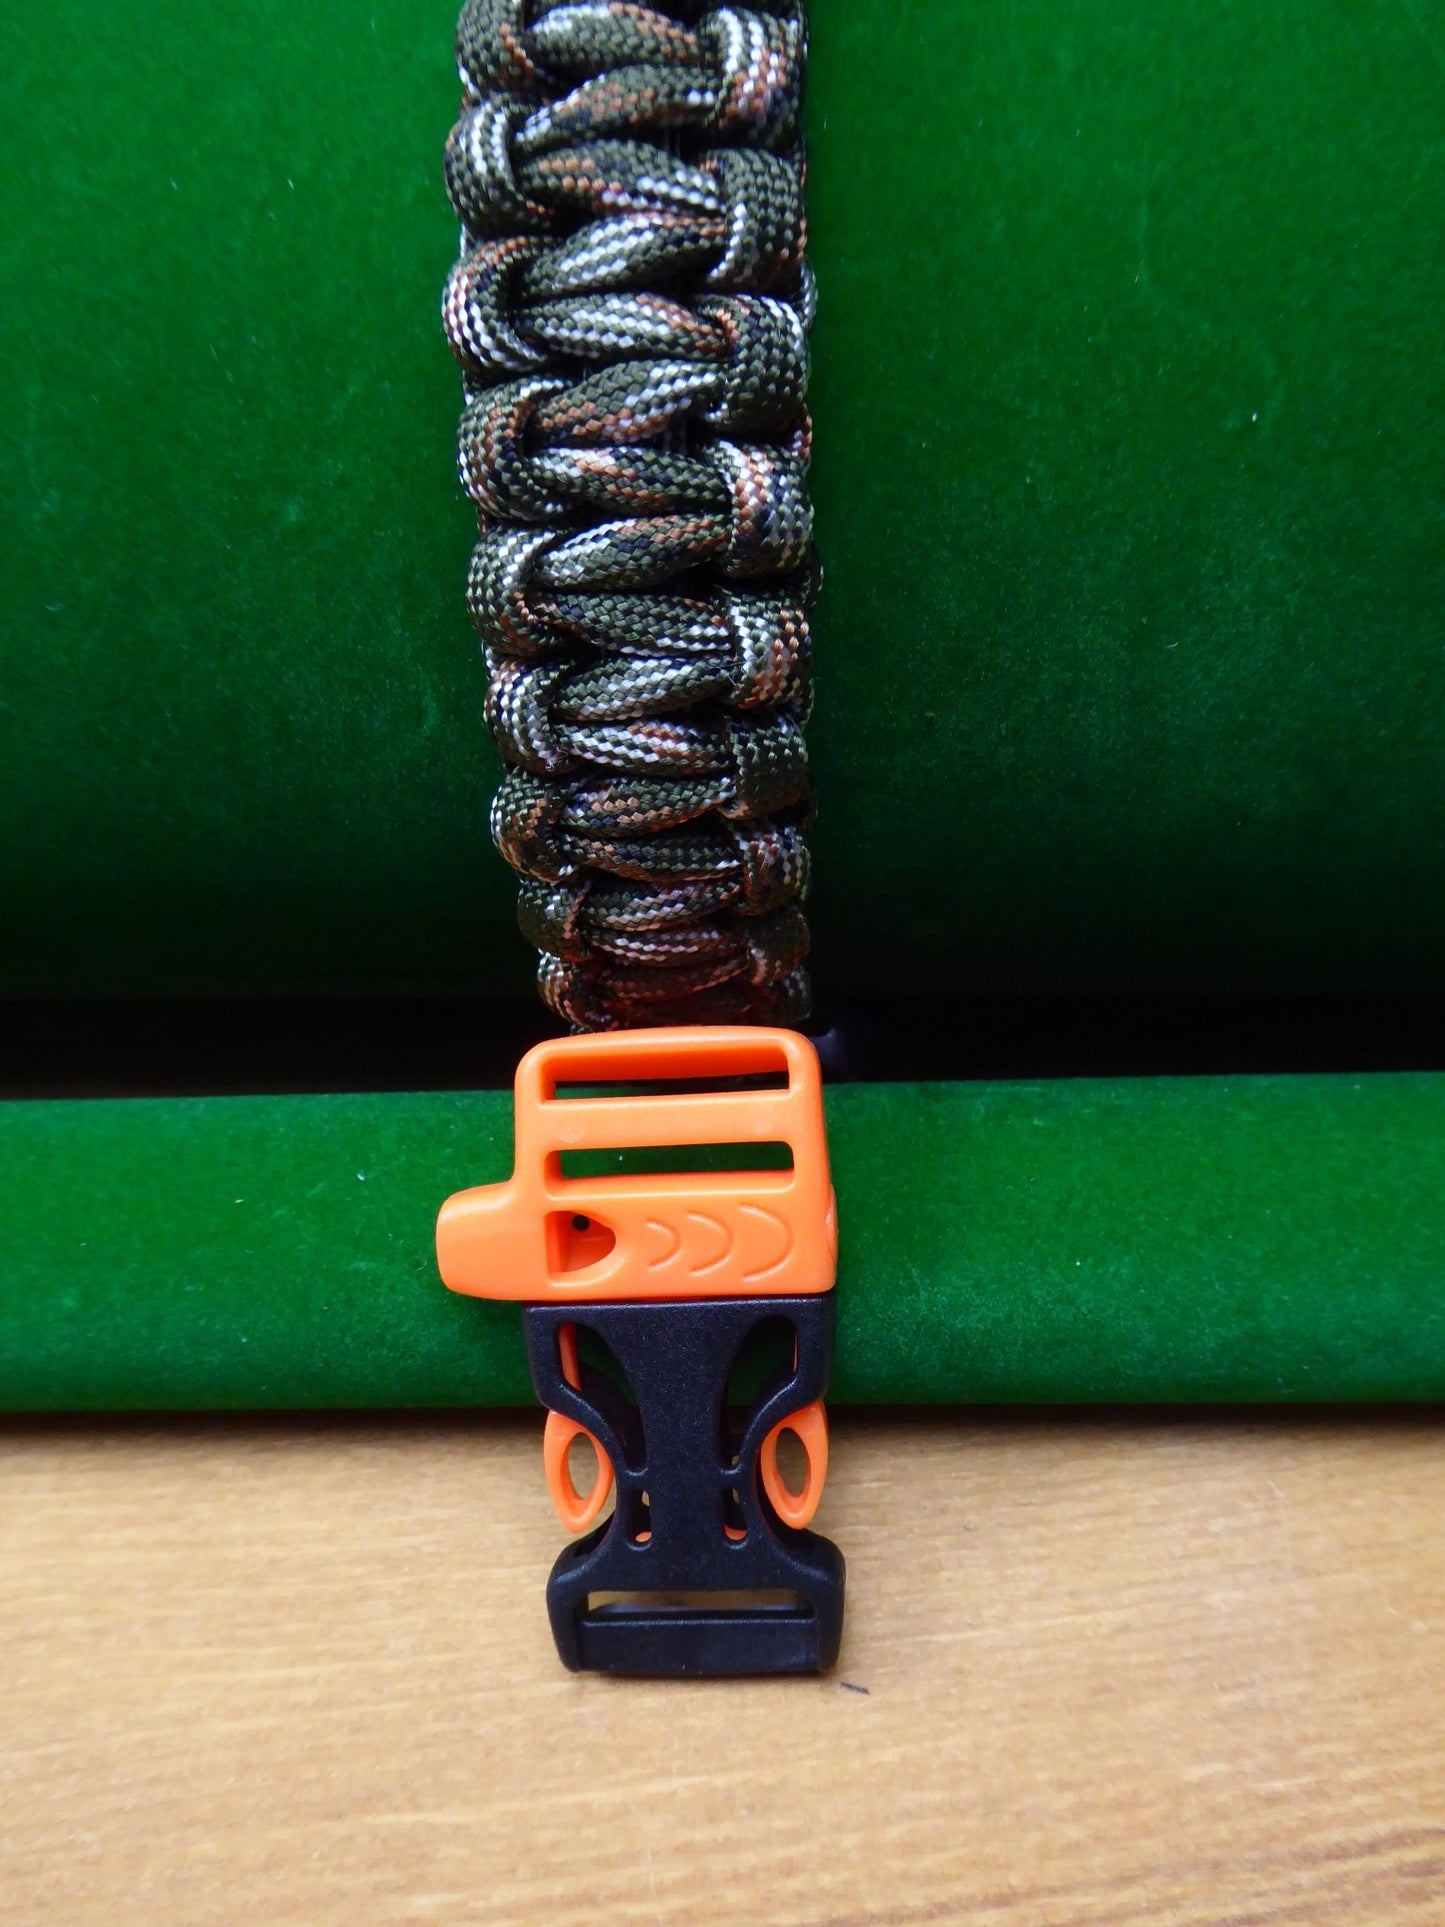 Paracord Buckle Bracelet kits with choice of colours Paracord Huggins Attic Green Camo Black & Orange plastic whistle Buckle  [Huggins attic]